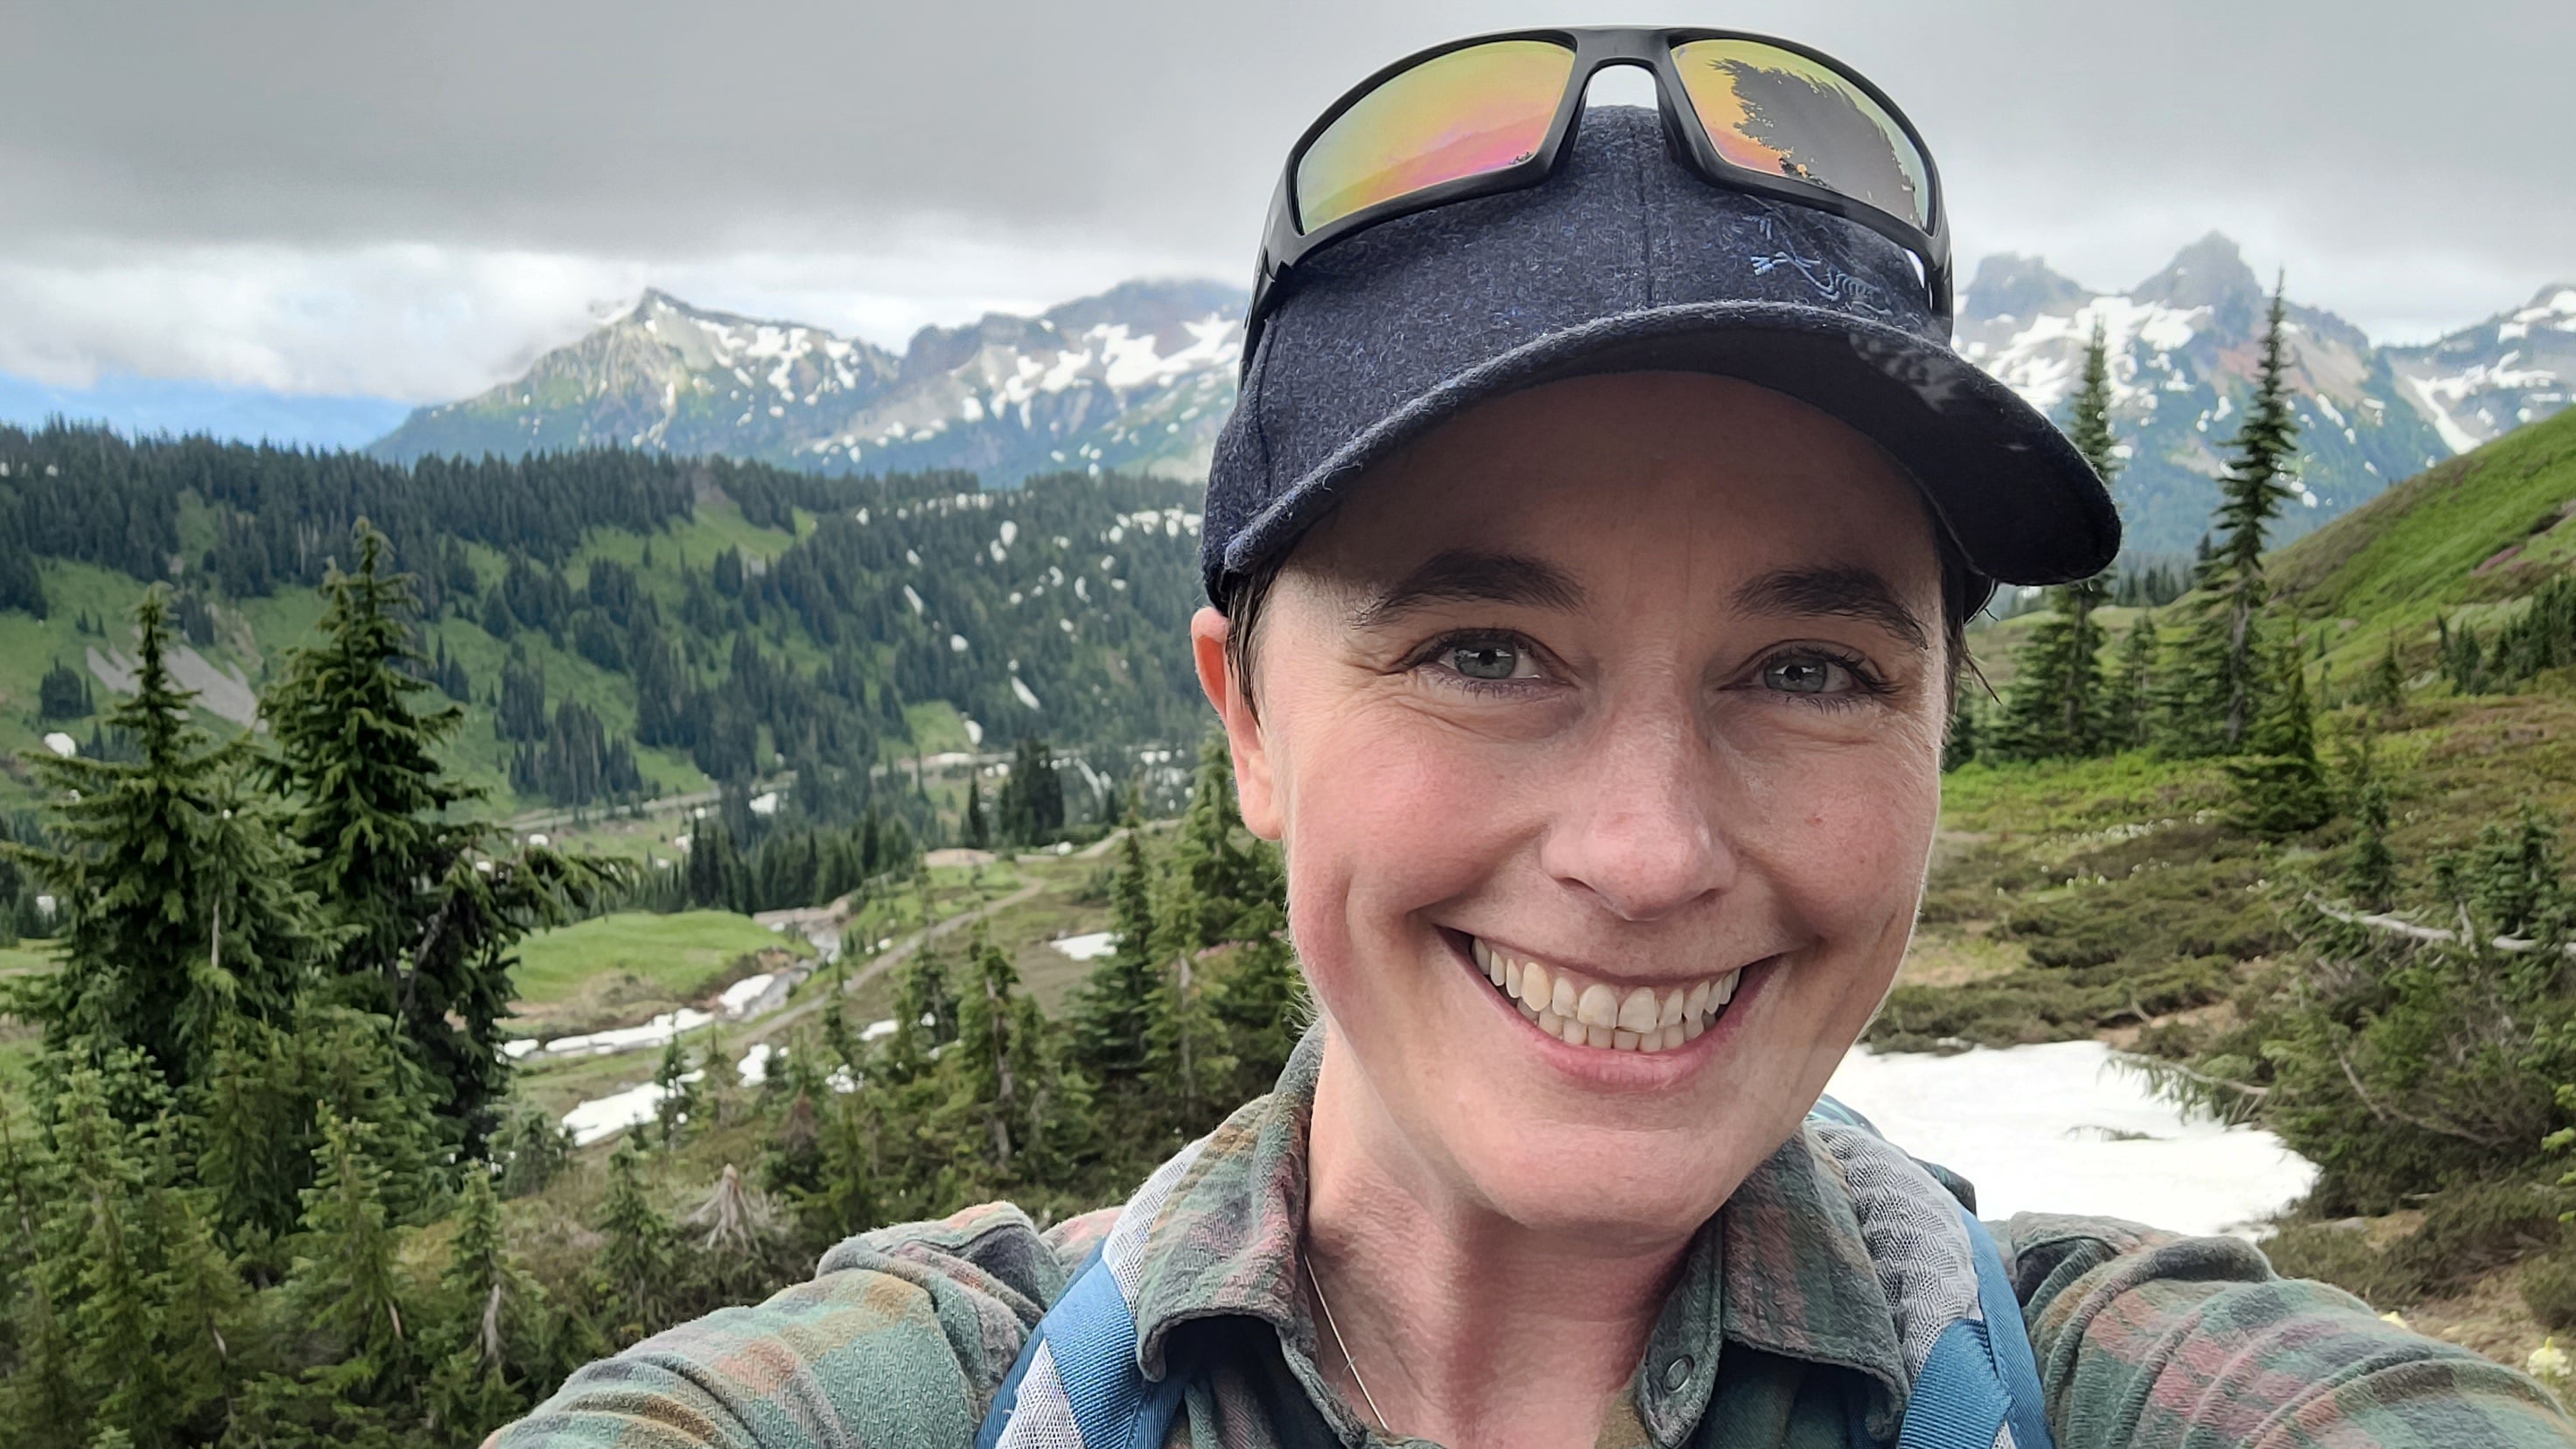 Smiling woman in charcoal grey baseball hat, amongst evergreen trees with Cascade mountains in the background.